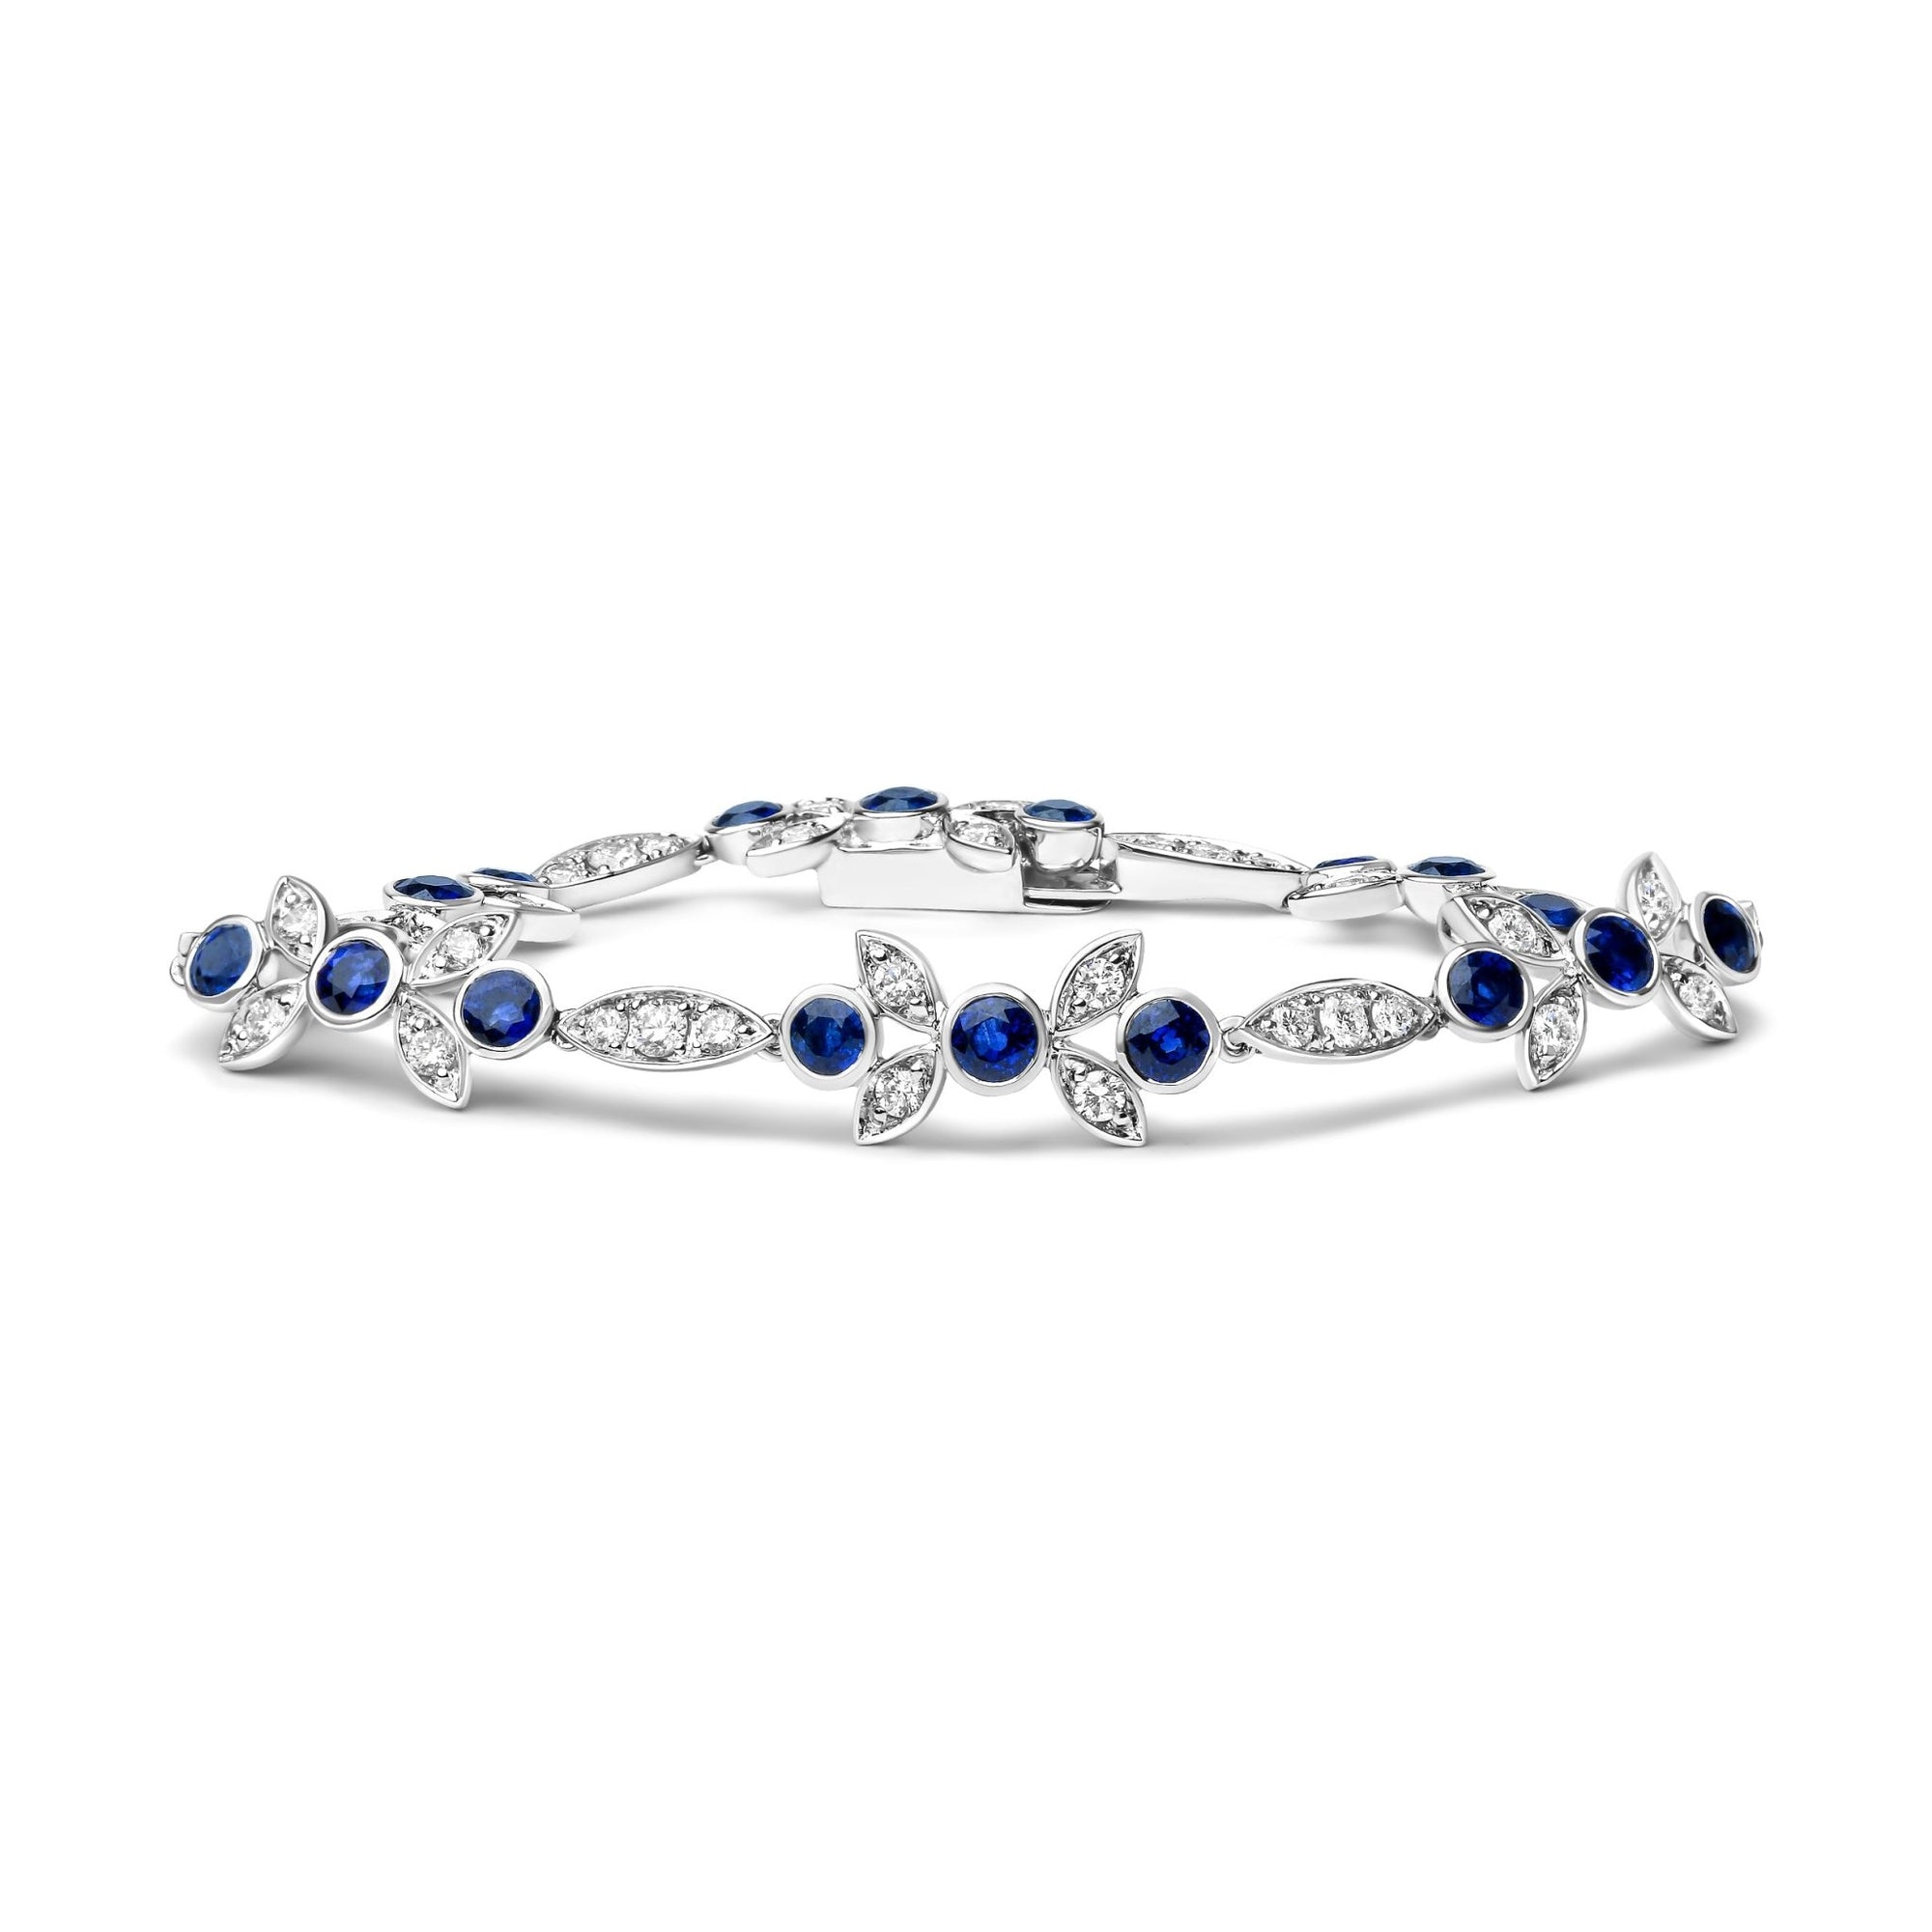 18K White Gold 1 3/4 Cttw Diamond and 3x3mm Round Blue Sapphire Gemstone Floral Link Bracelet (G-H Color, SI1-SI2 Clarity) - Size 7" - LinkagejewelrydesignLinkagejewelrydesign